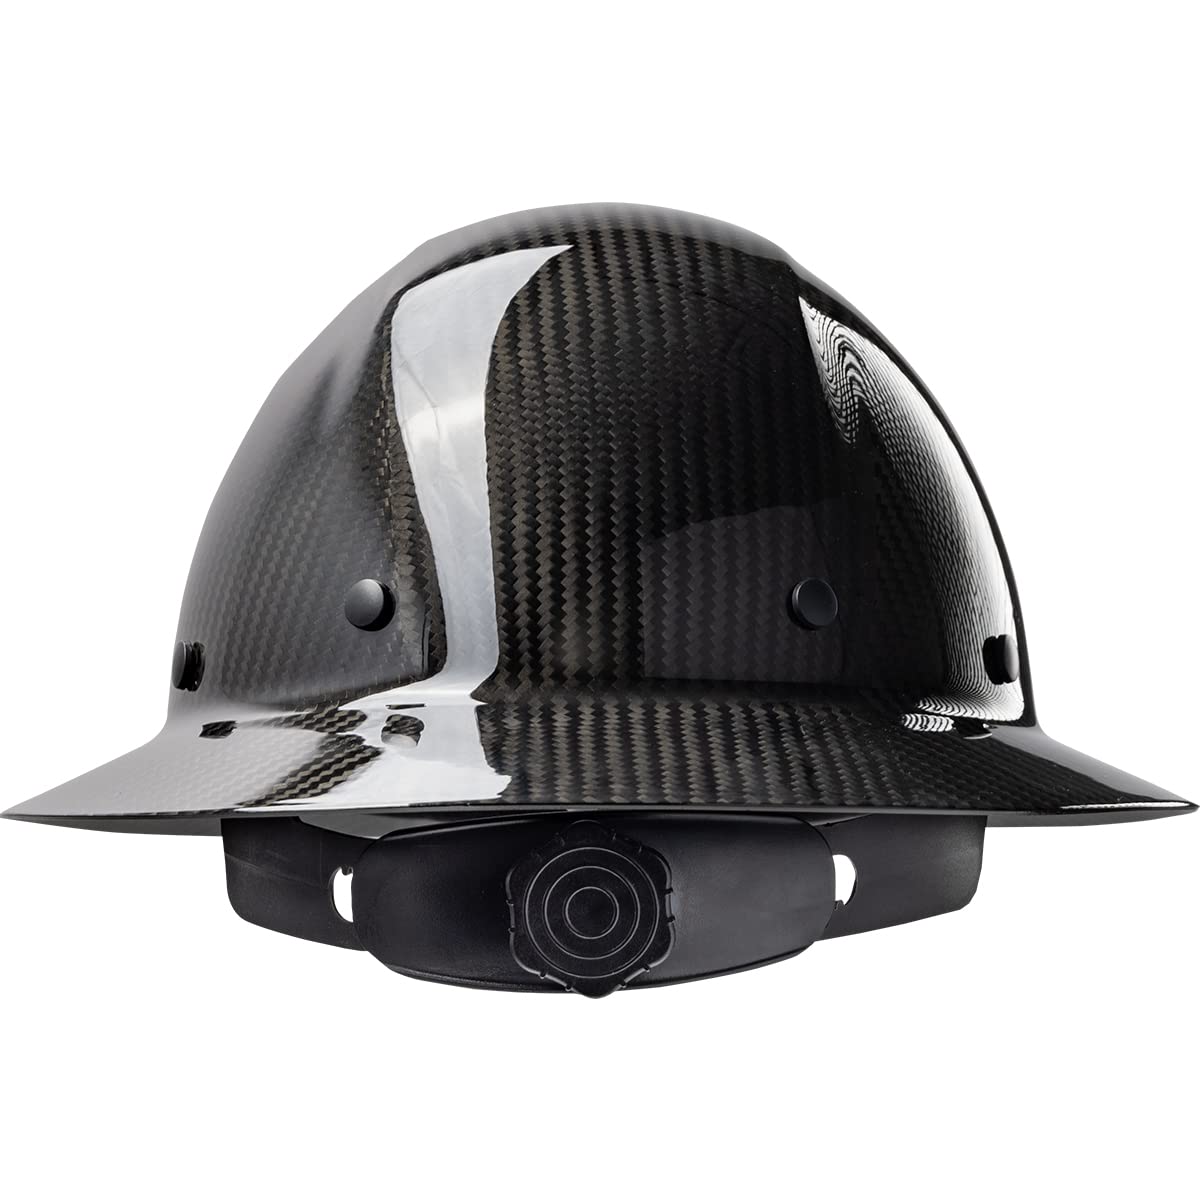 PIP Wolfjaw, Full Brim Smooth Dome Hard Hat with Glossy Carbon Fiber Shell, 8-Point Riveted Textile Suspension, Wheel-Ratchet Adjustment, Black (280-HP1471R-11)